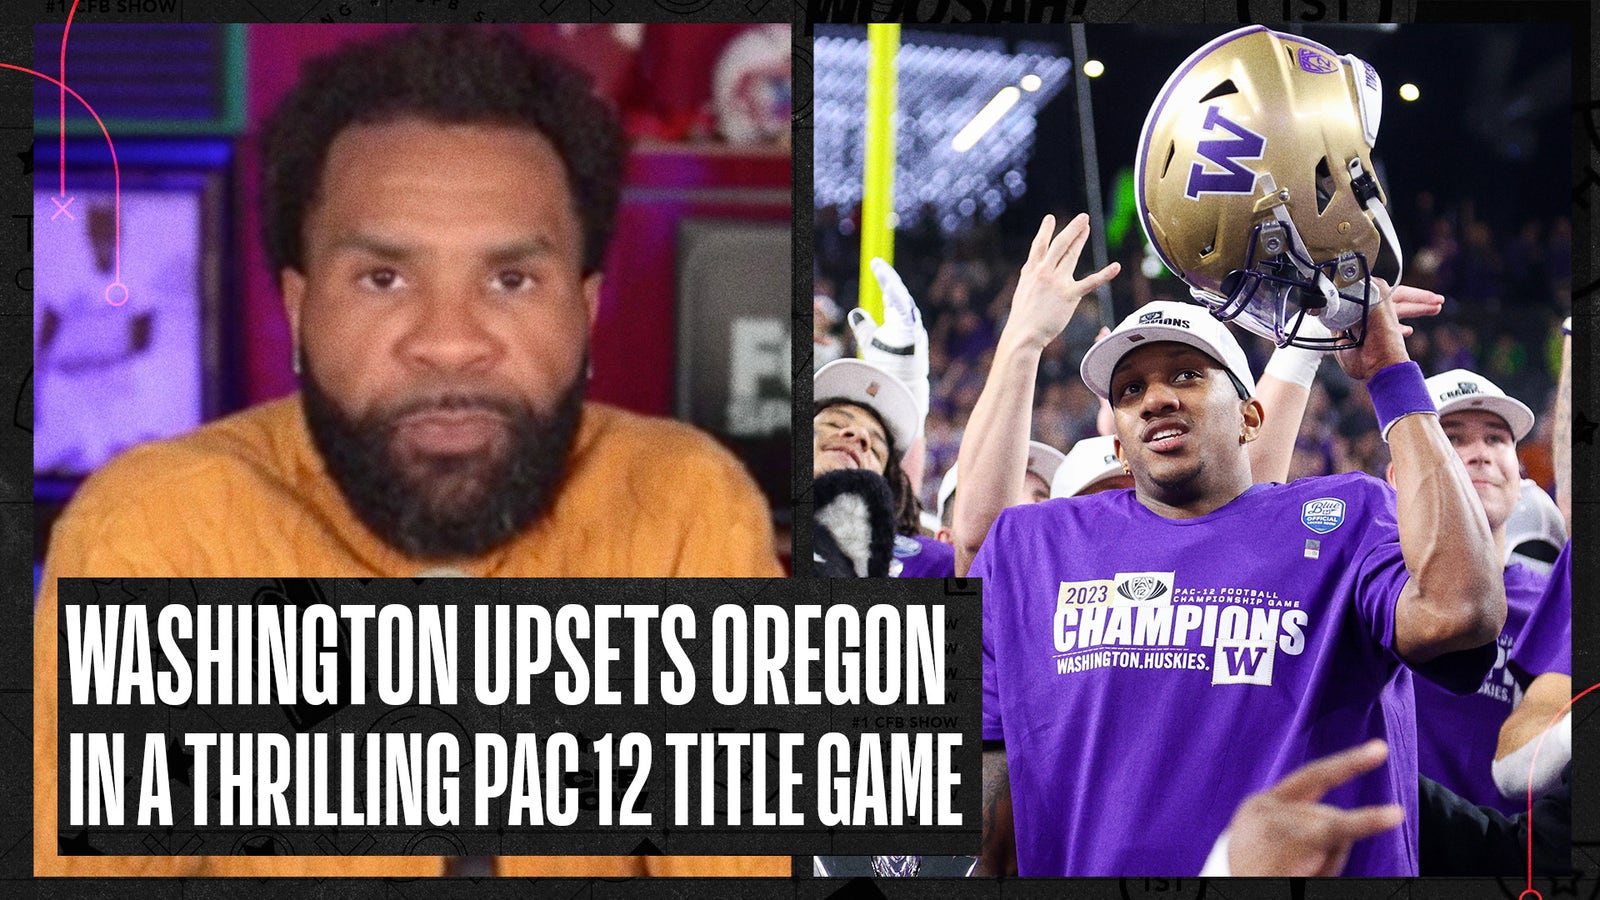 Washington's offense is too much for Oregon